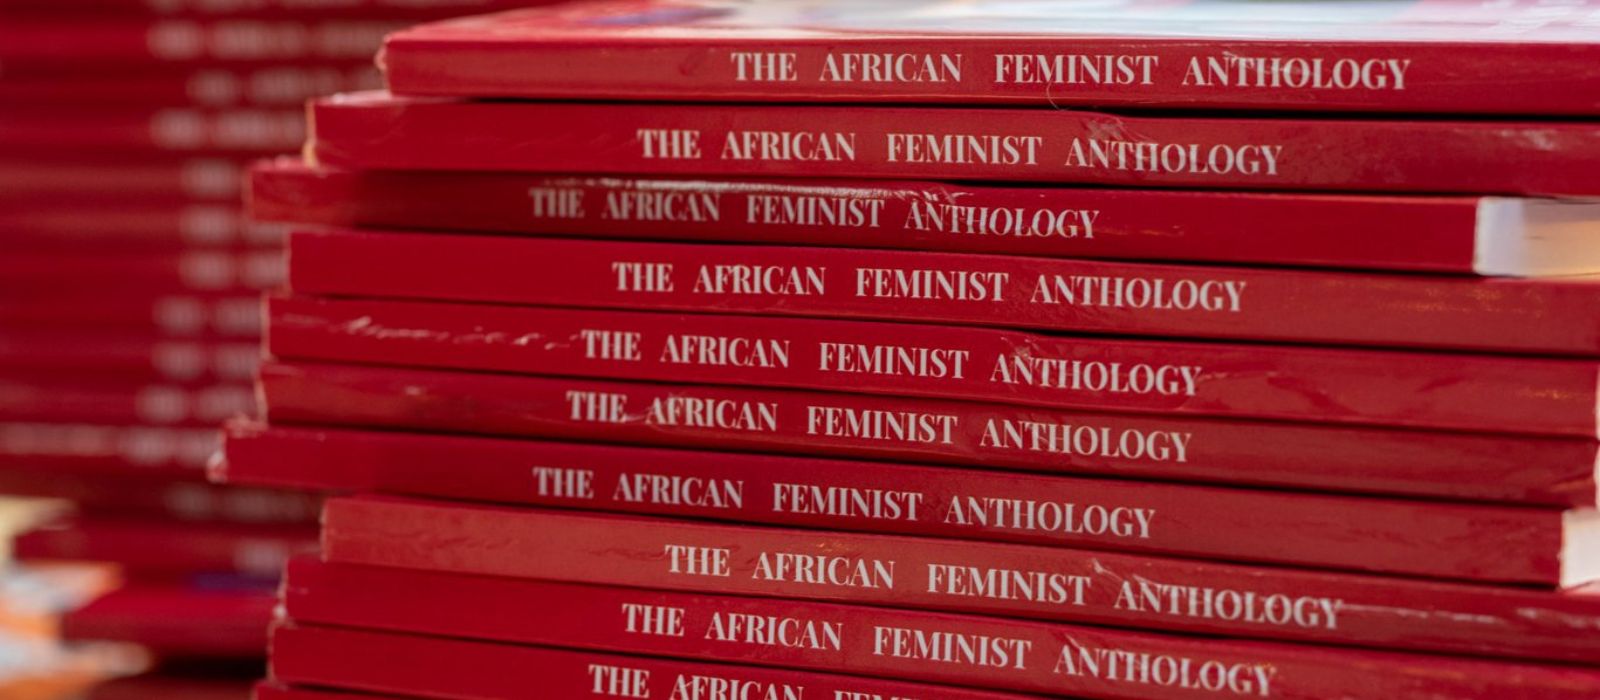 New anthology highlights African feminism